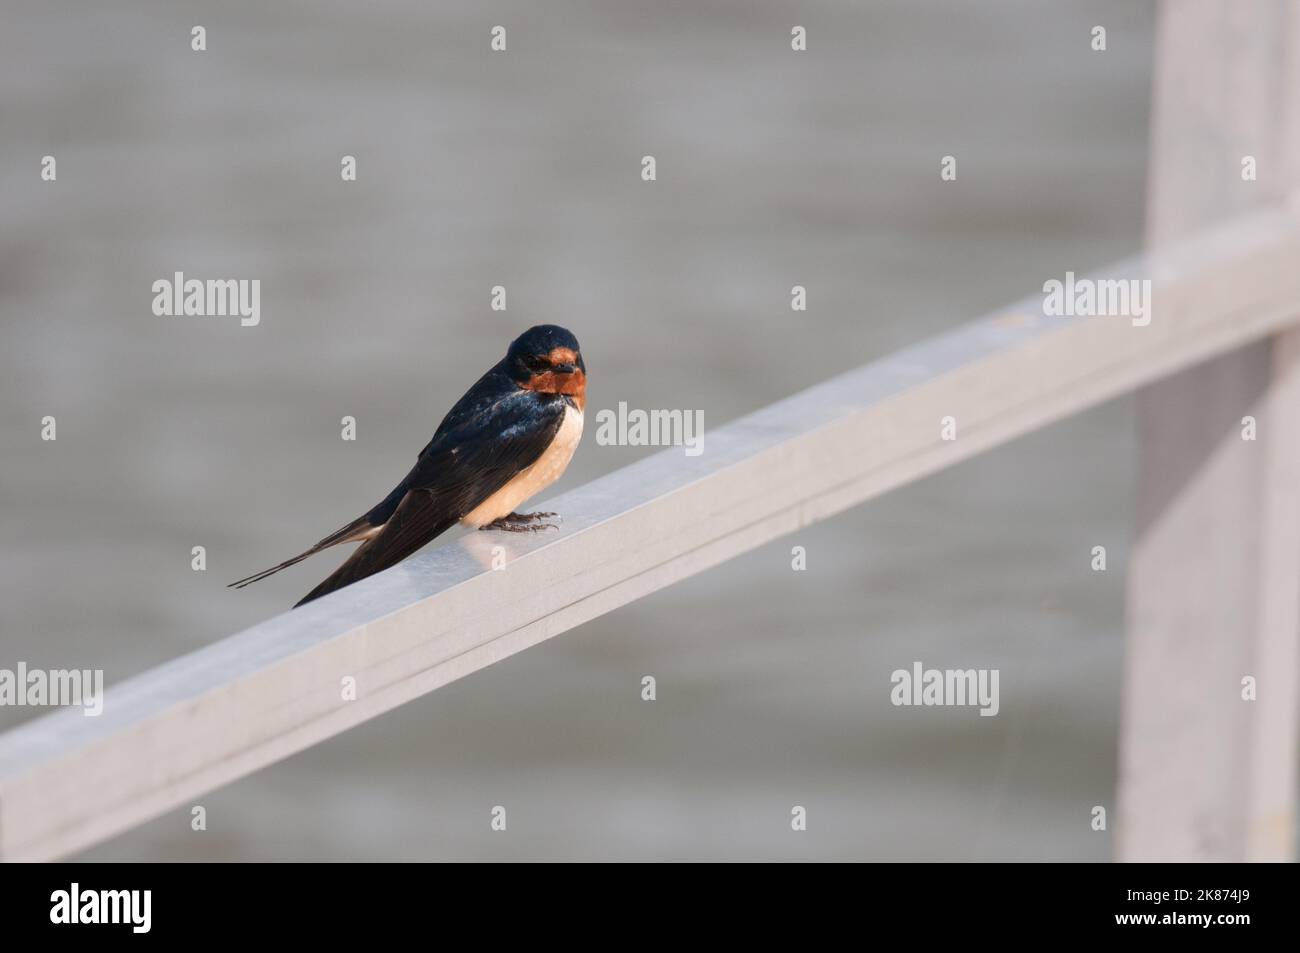 Barn Swallow perched on aluminum boat launch railing Stock Photo